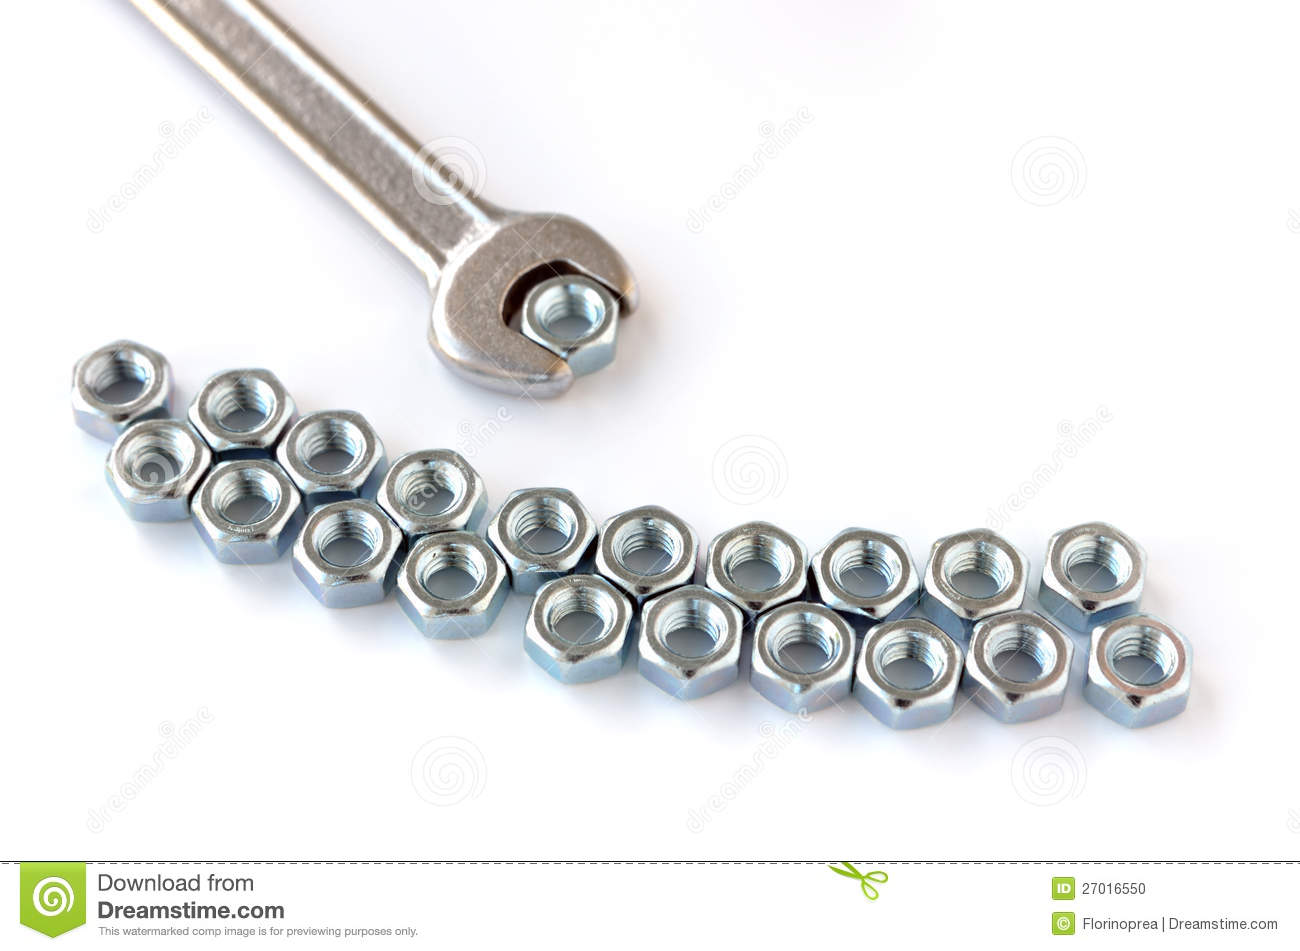 Wrench With Hex Nuts Stock Photo   Image  27016550